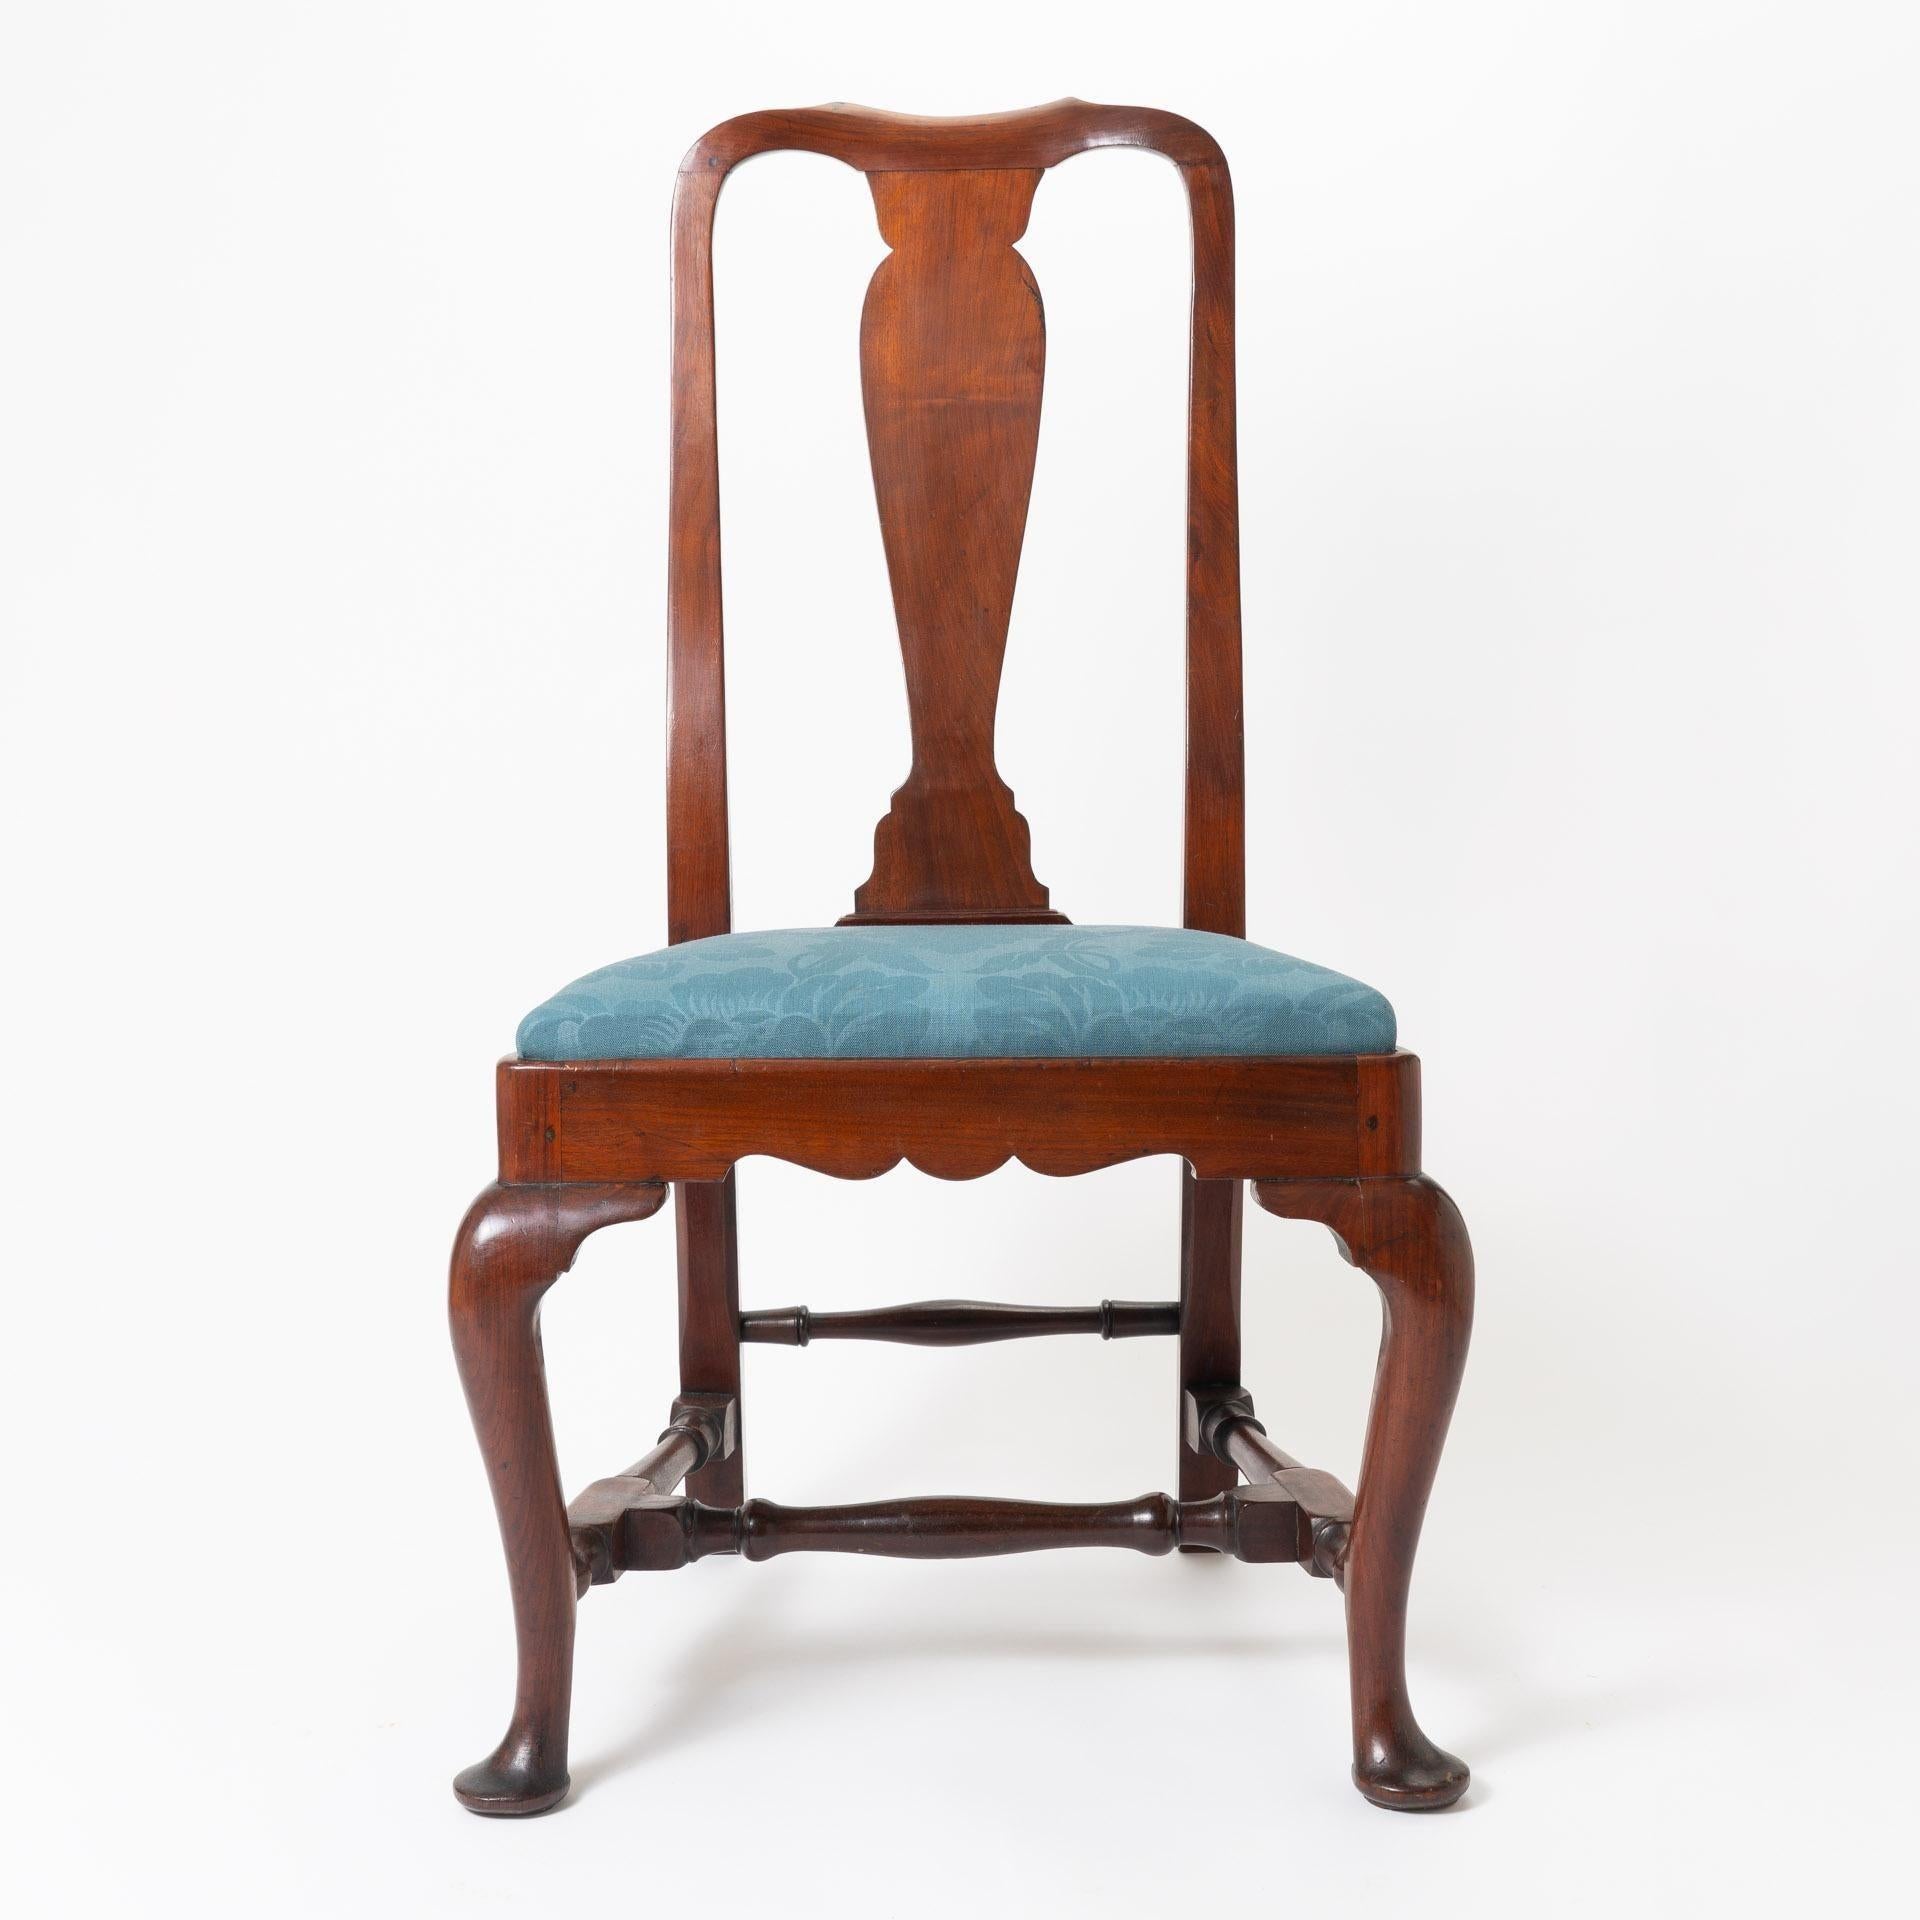 American Queen Anne old growth mahogany upholstered slip seat side chair. The square seat is fitted to a conforming scolloped profile frame on cabriole legs terminating in pad feet. The seat is upholstered with horse hair fill and covered in a blue